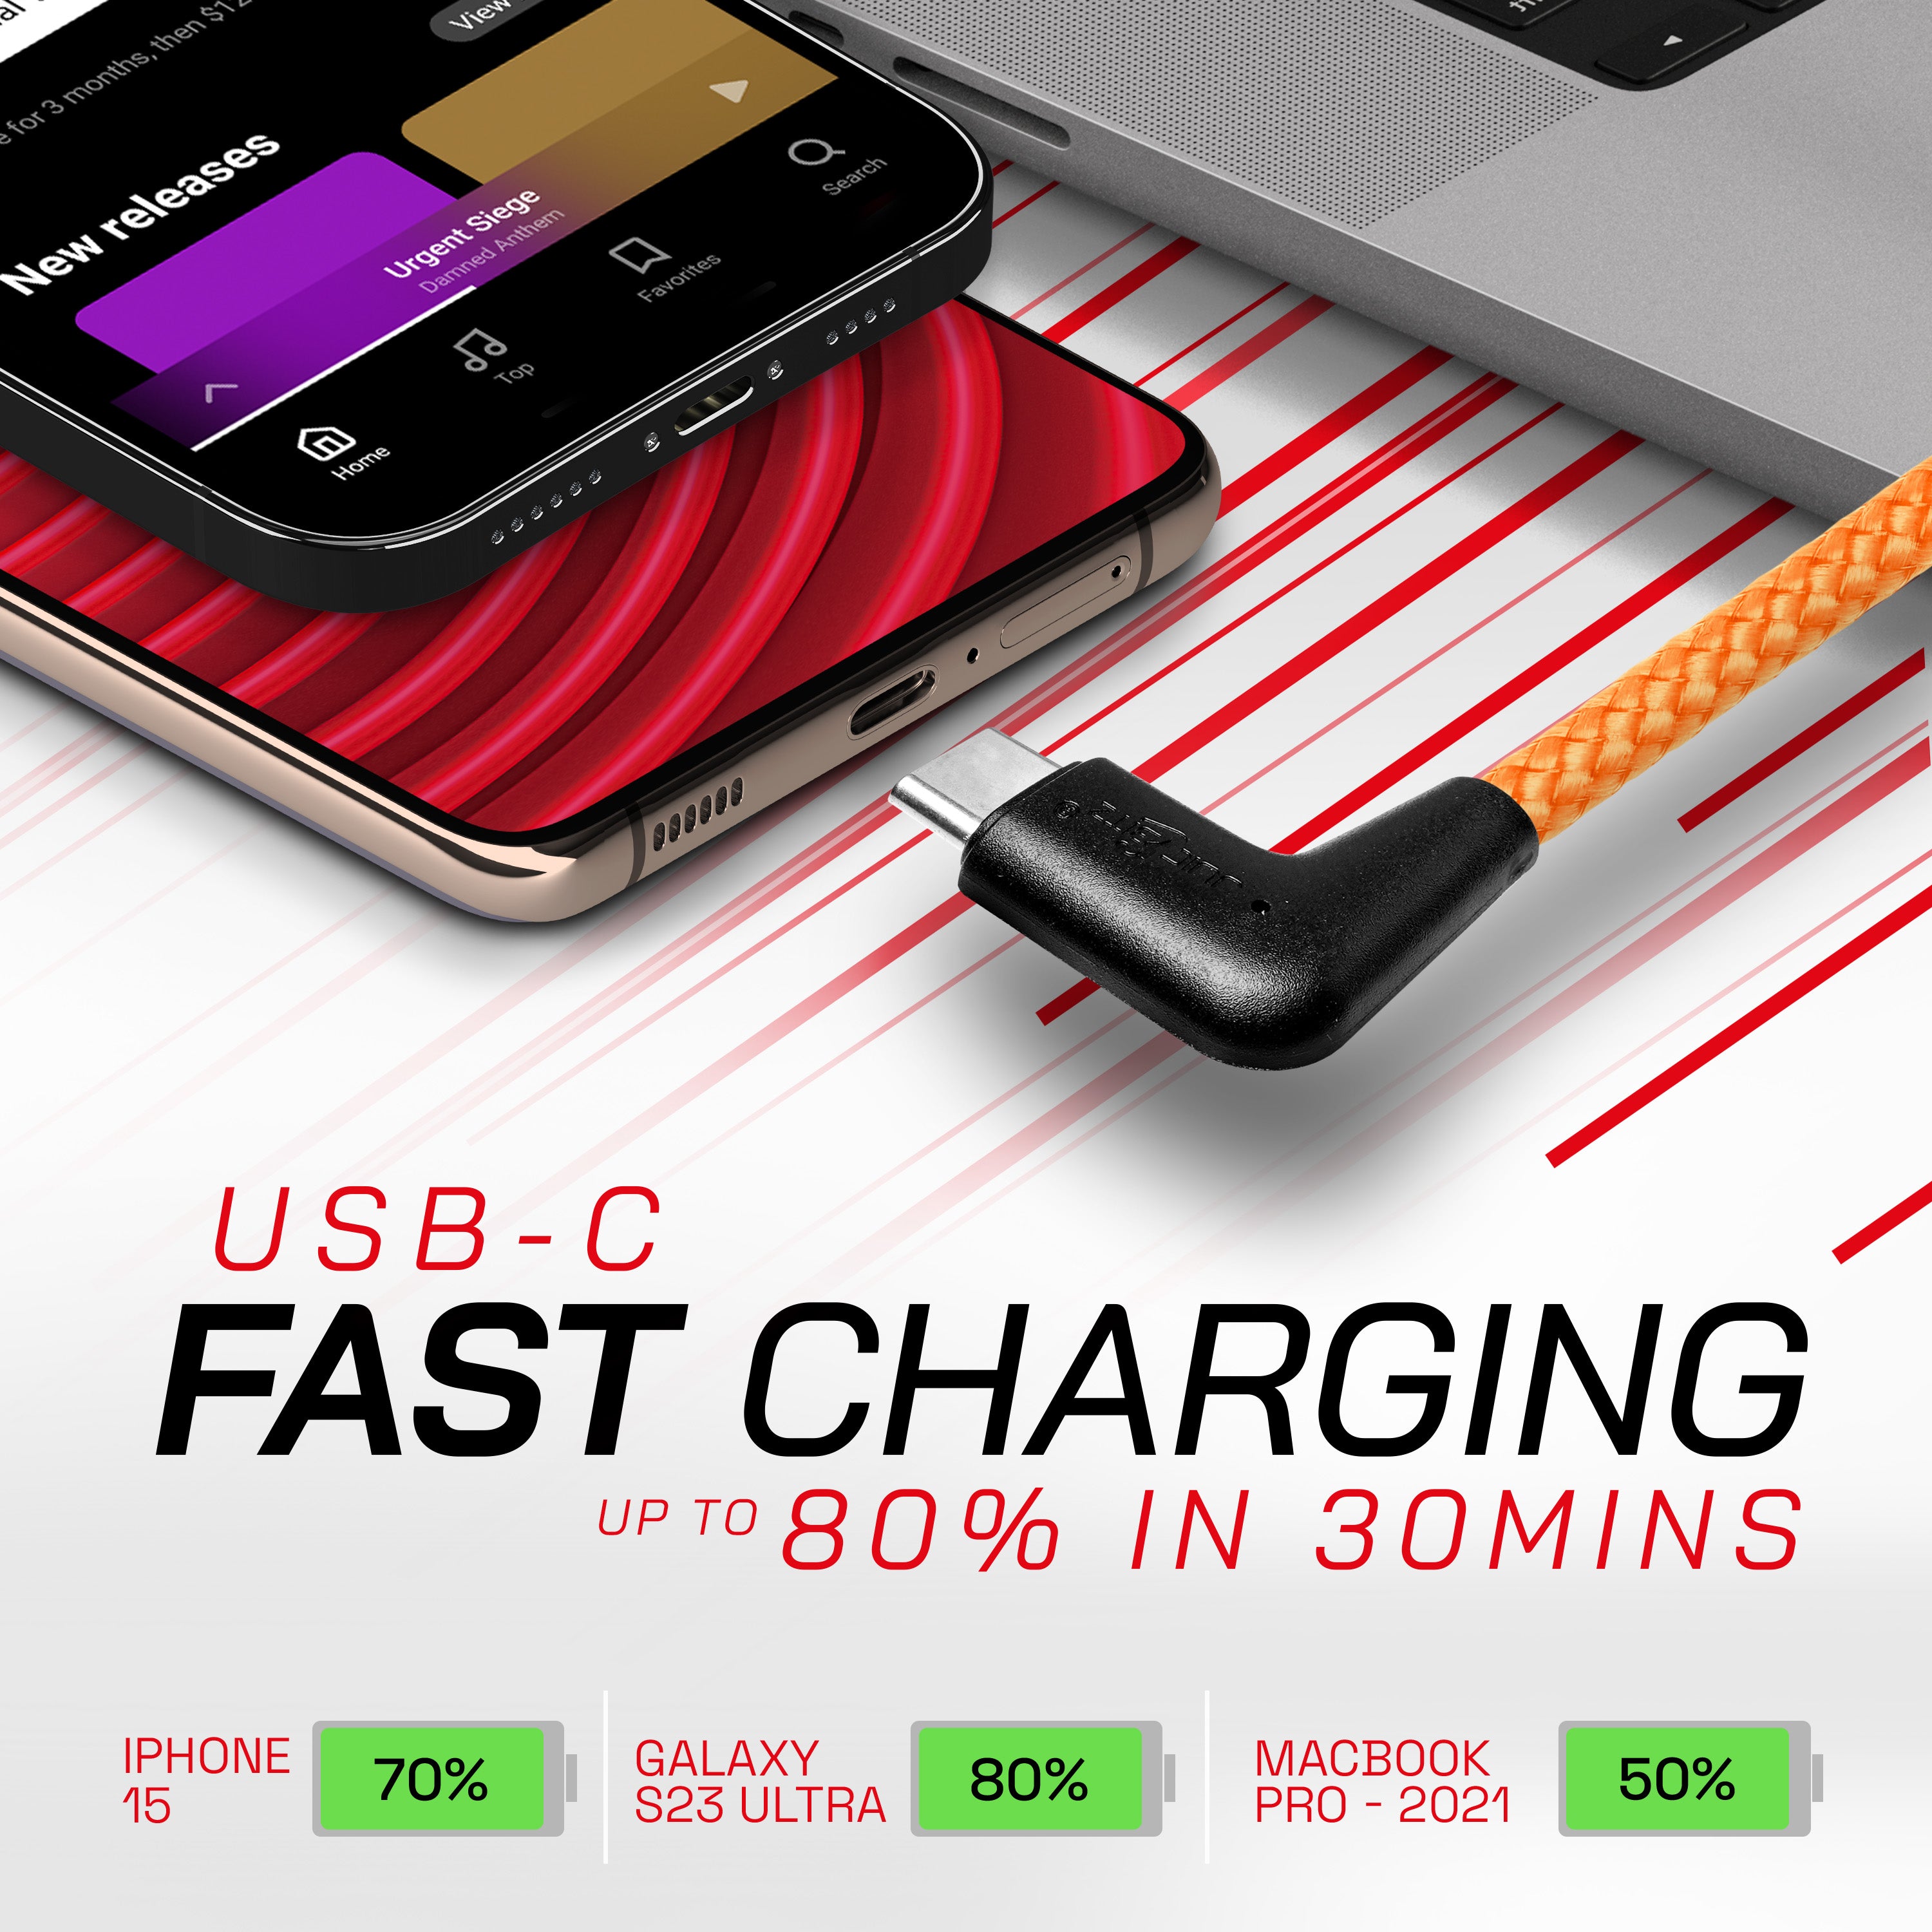 Braided USB-C to Angled USB-C (USB2.0) 100W PD Fast Charger Data Cable - Orange